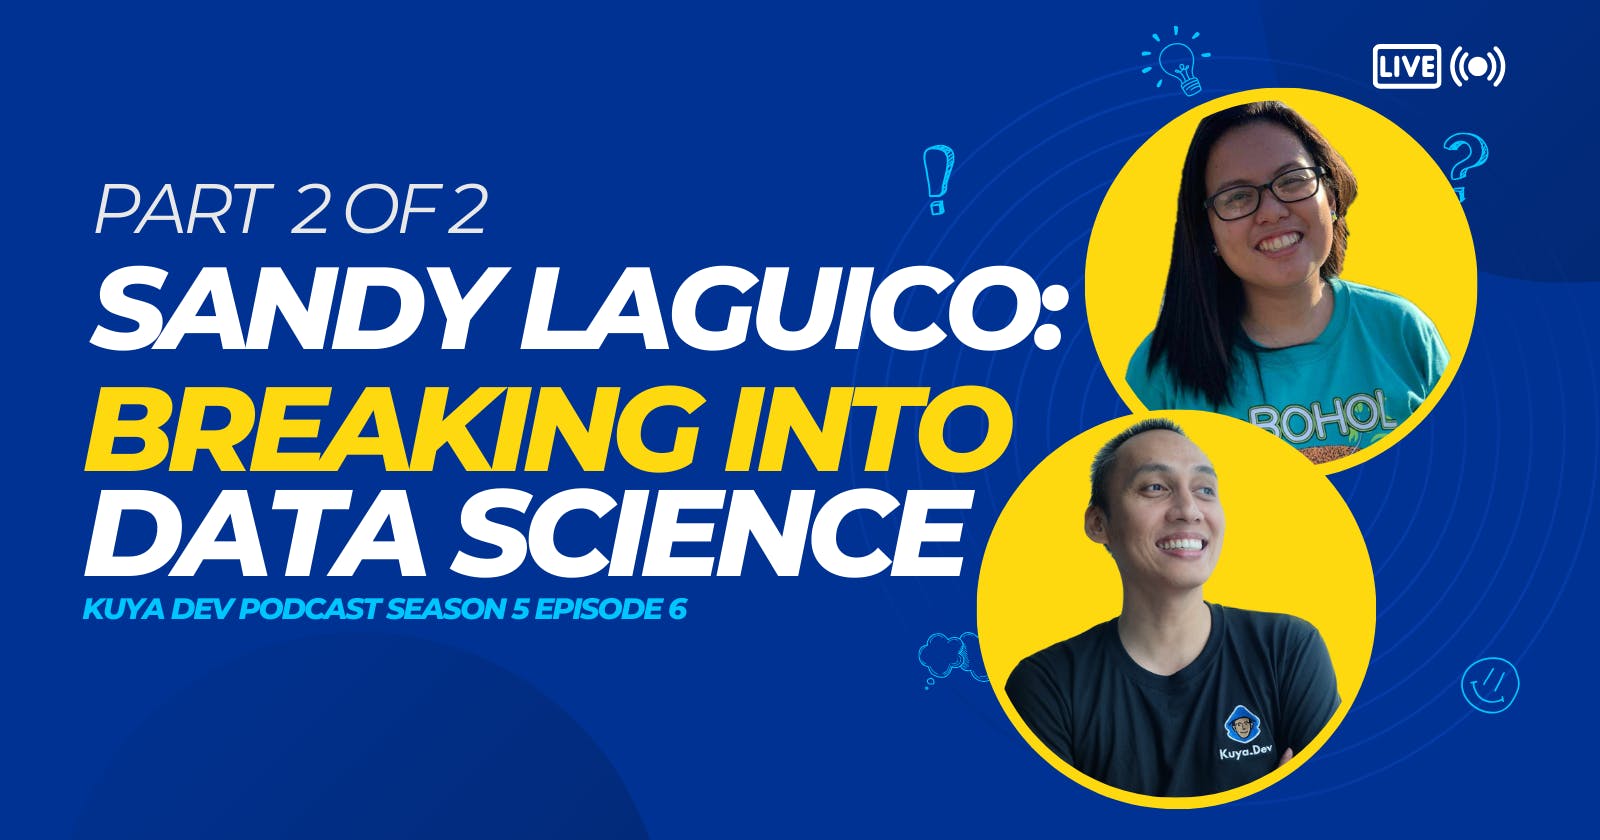 Sandy Lauguico: Breaking into Data Science (Part 2 of 2)